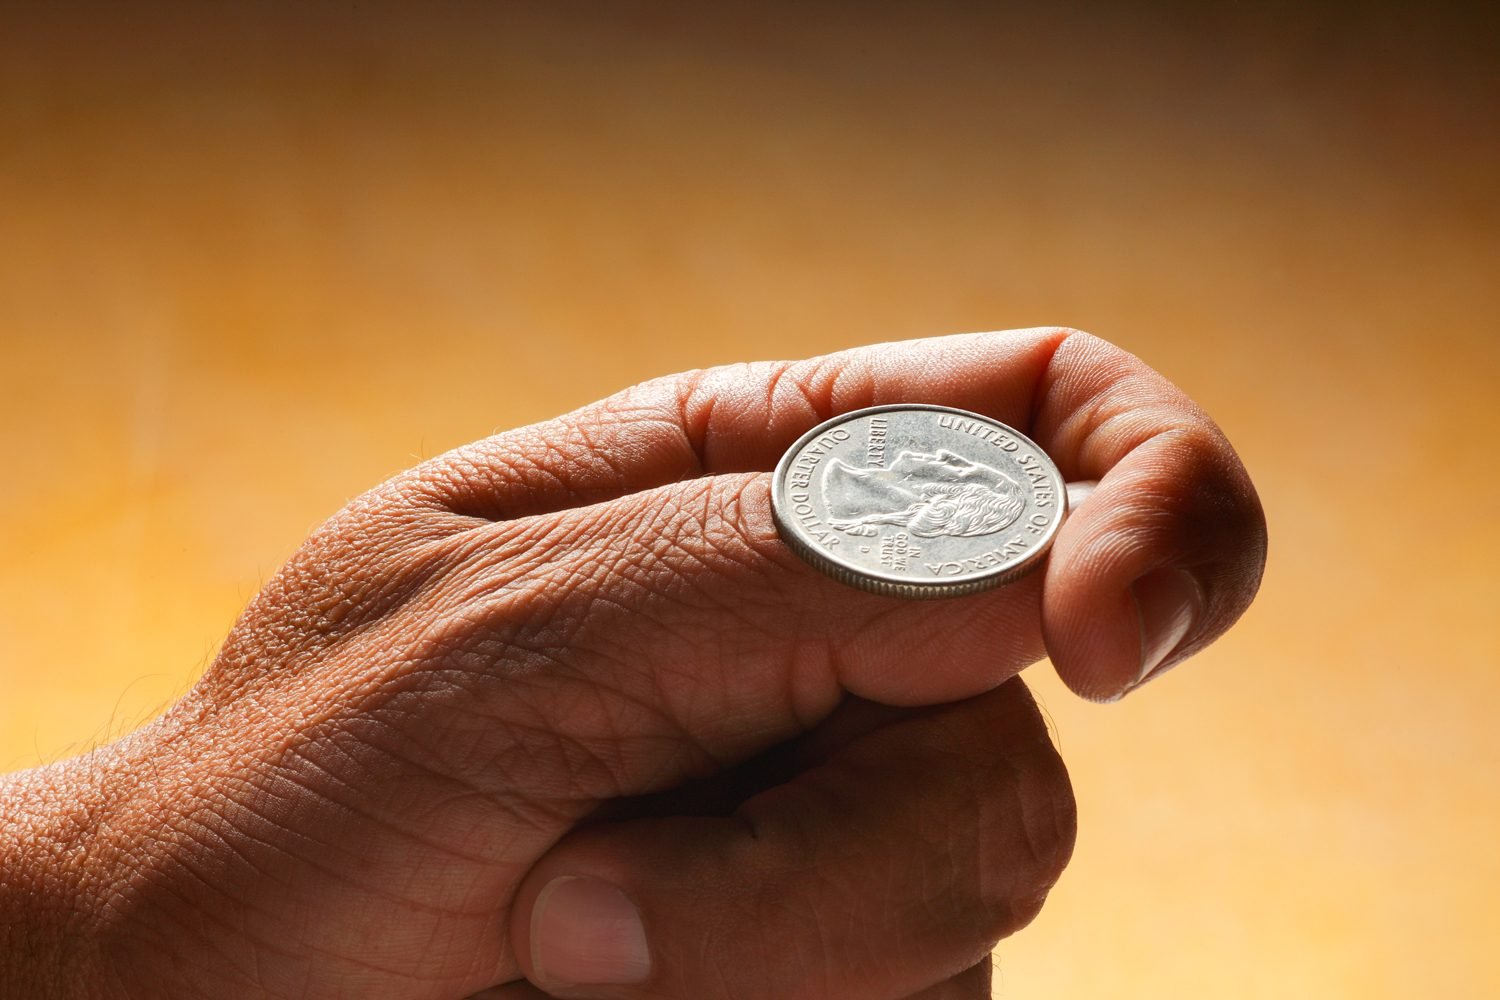 Mans Hand Pictured with a Quarter on his thumb and index finger, indicating a coin flip is about to happen, landing on heads or tails when it lands